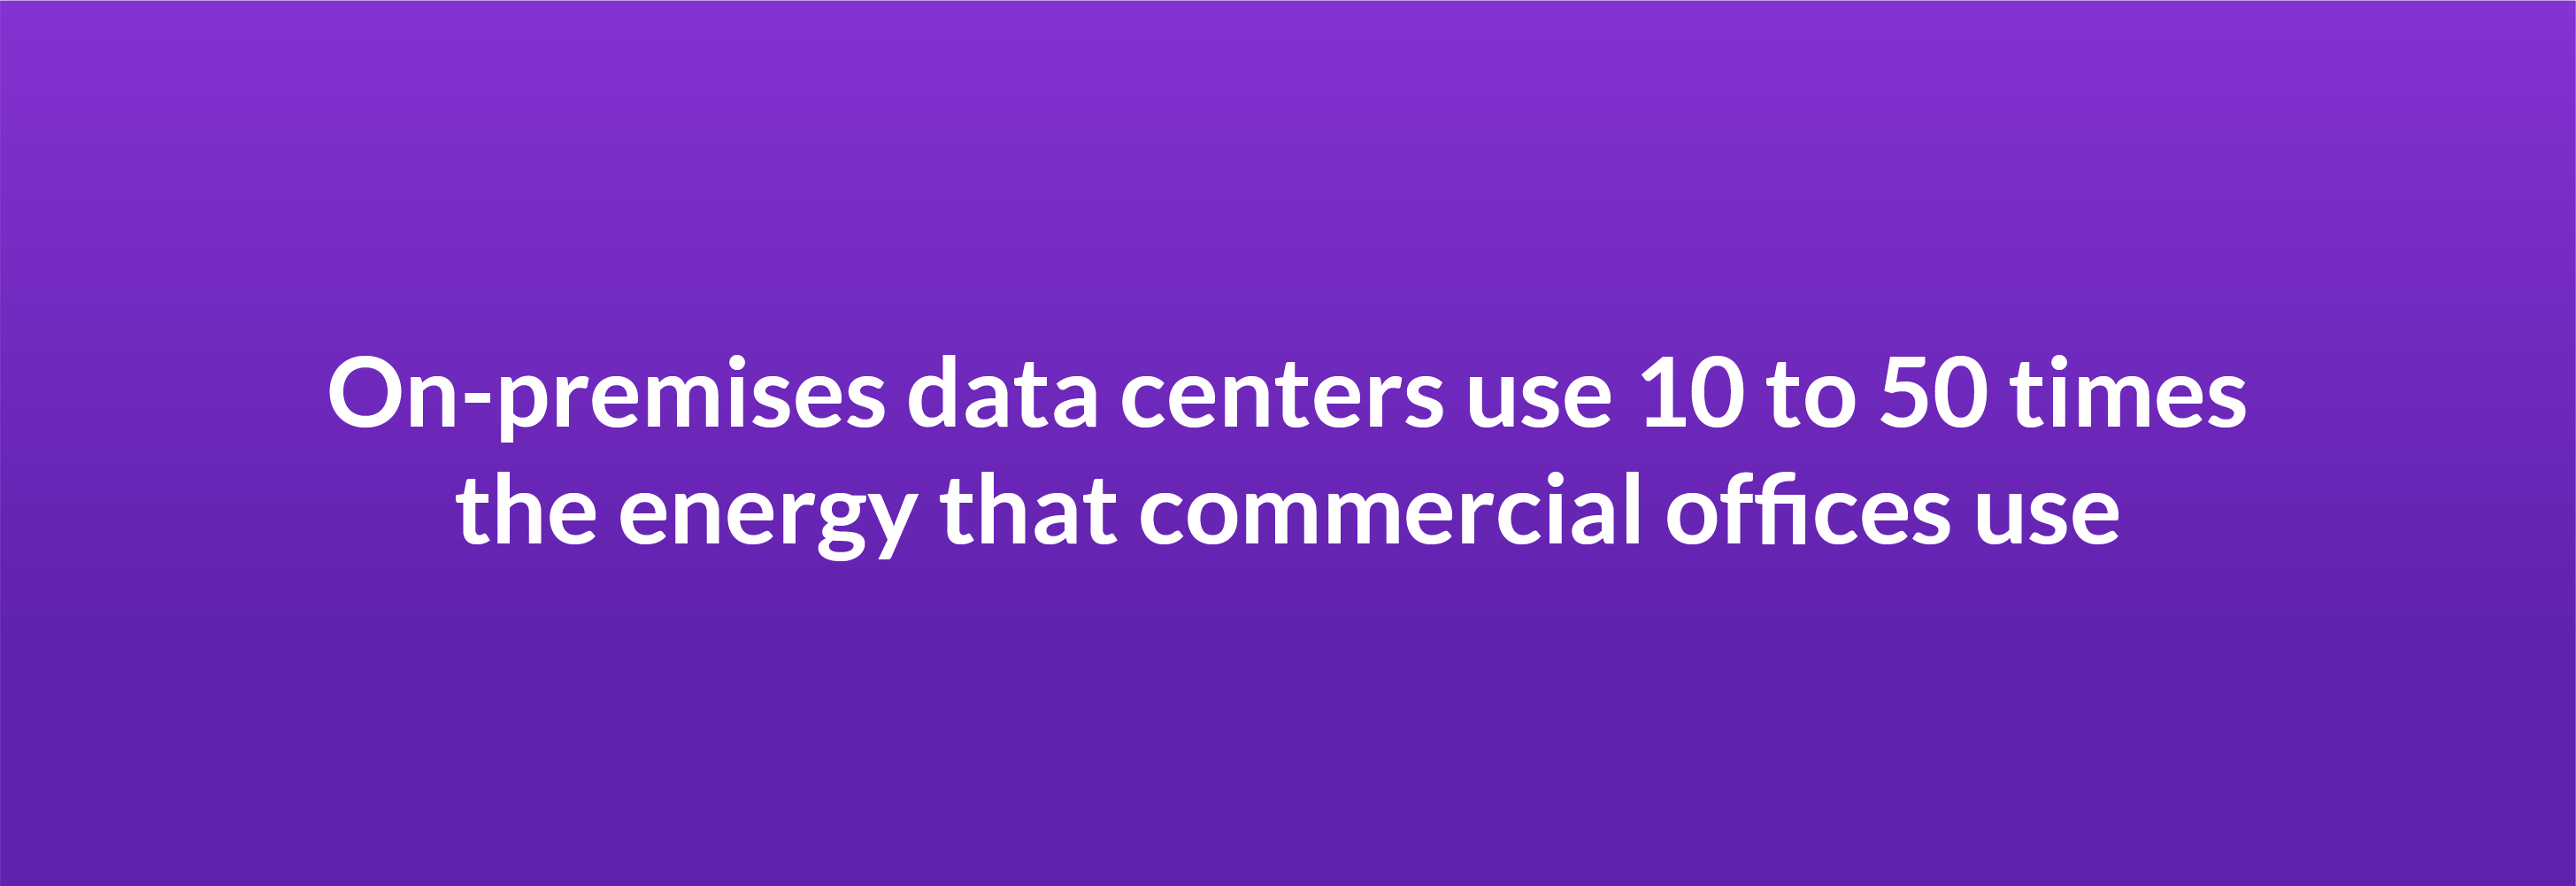 On-premises data centers use 10 to 50 times the energy that commercial offices use